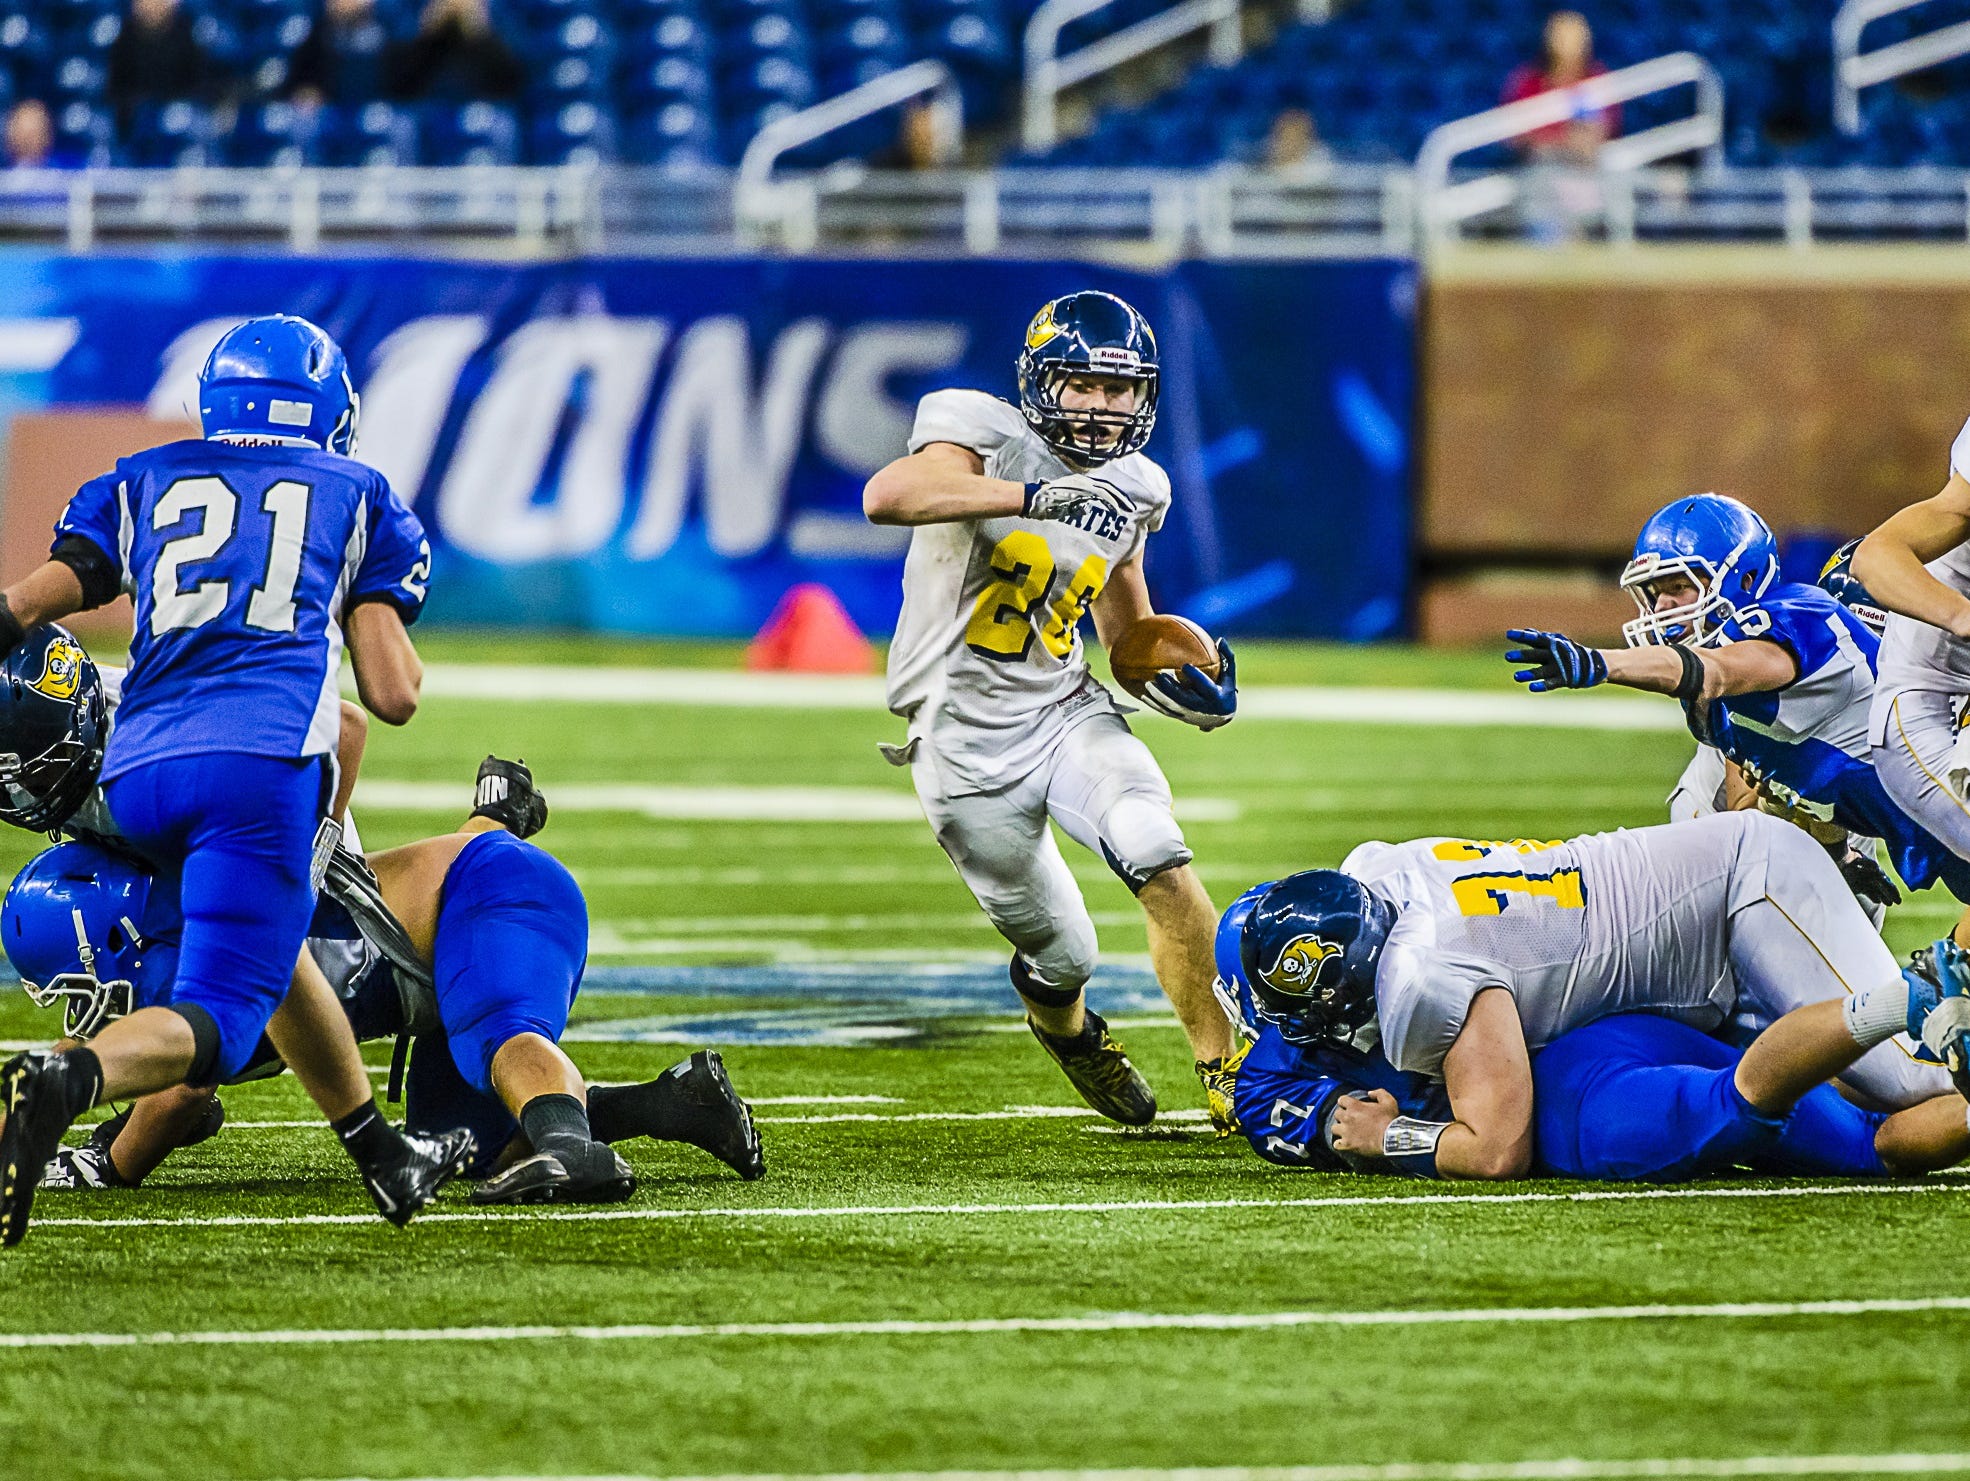 Jared Smith, of Pewamo-Westphalia, cuts back to a hole in the Ishpeming line late in the state high school football title game last season. He ended the season with 3,250 rushing yards, a new state record. Smith is one of nine returning players on offense and defense for the Pirates.